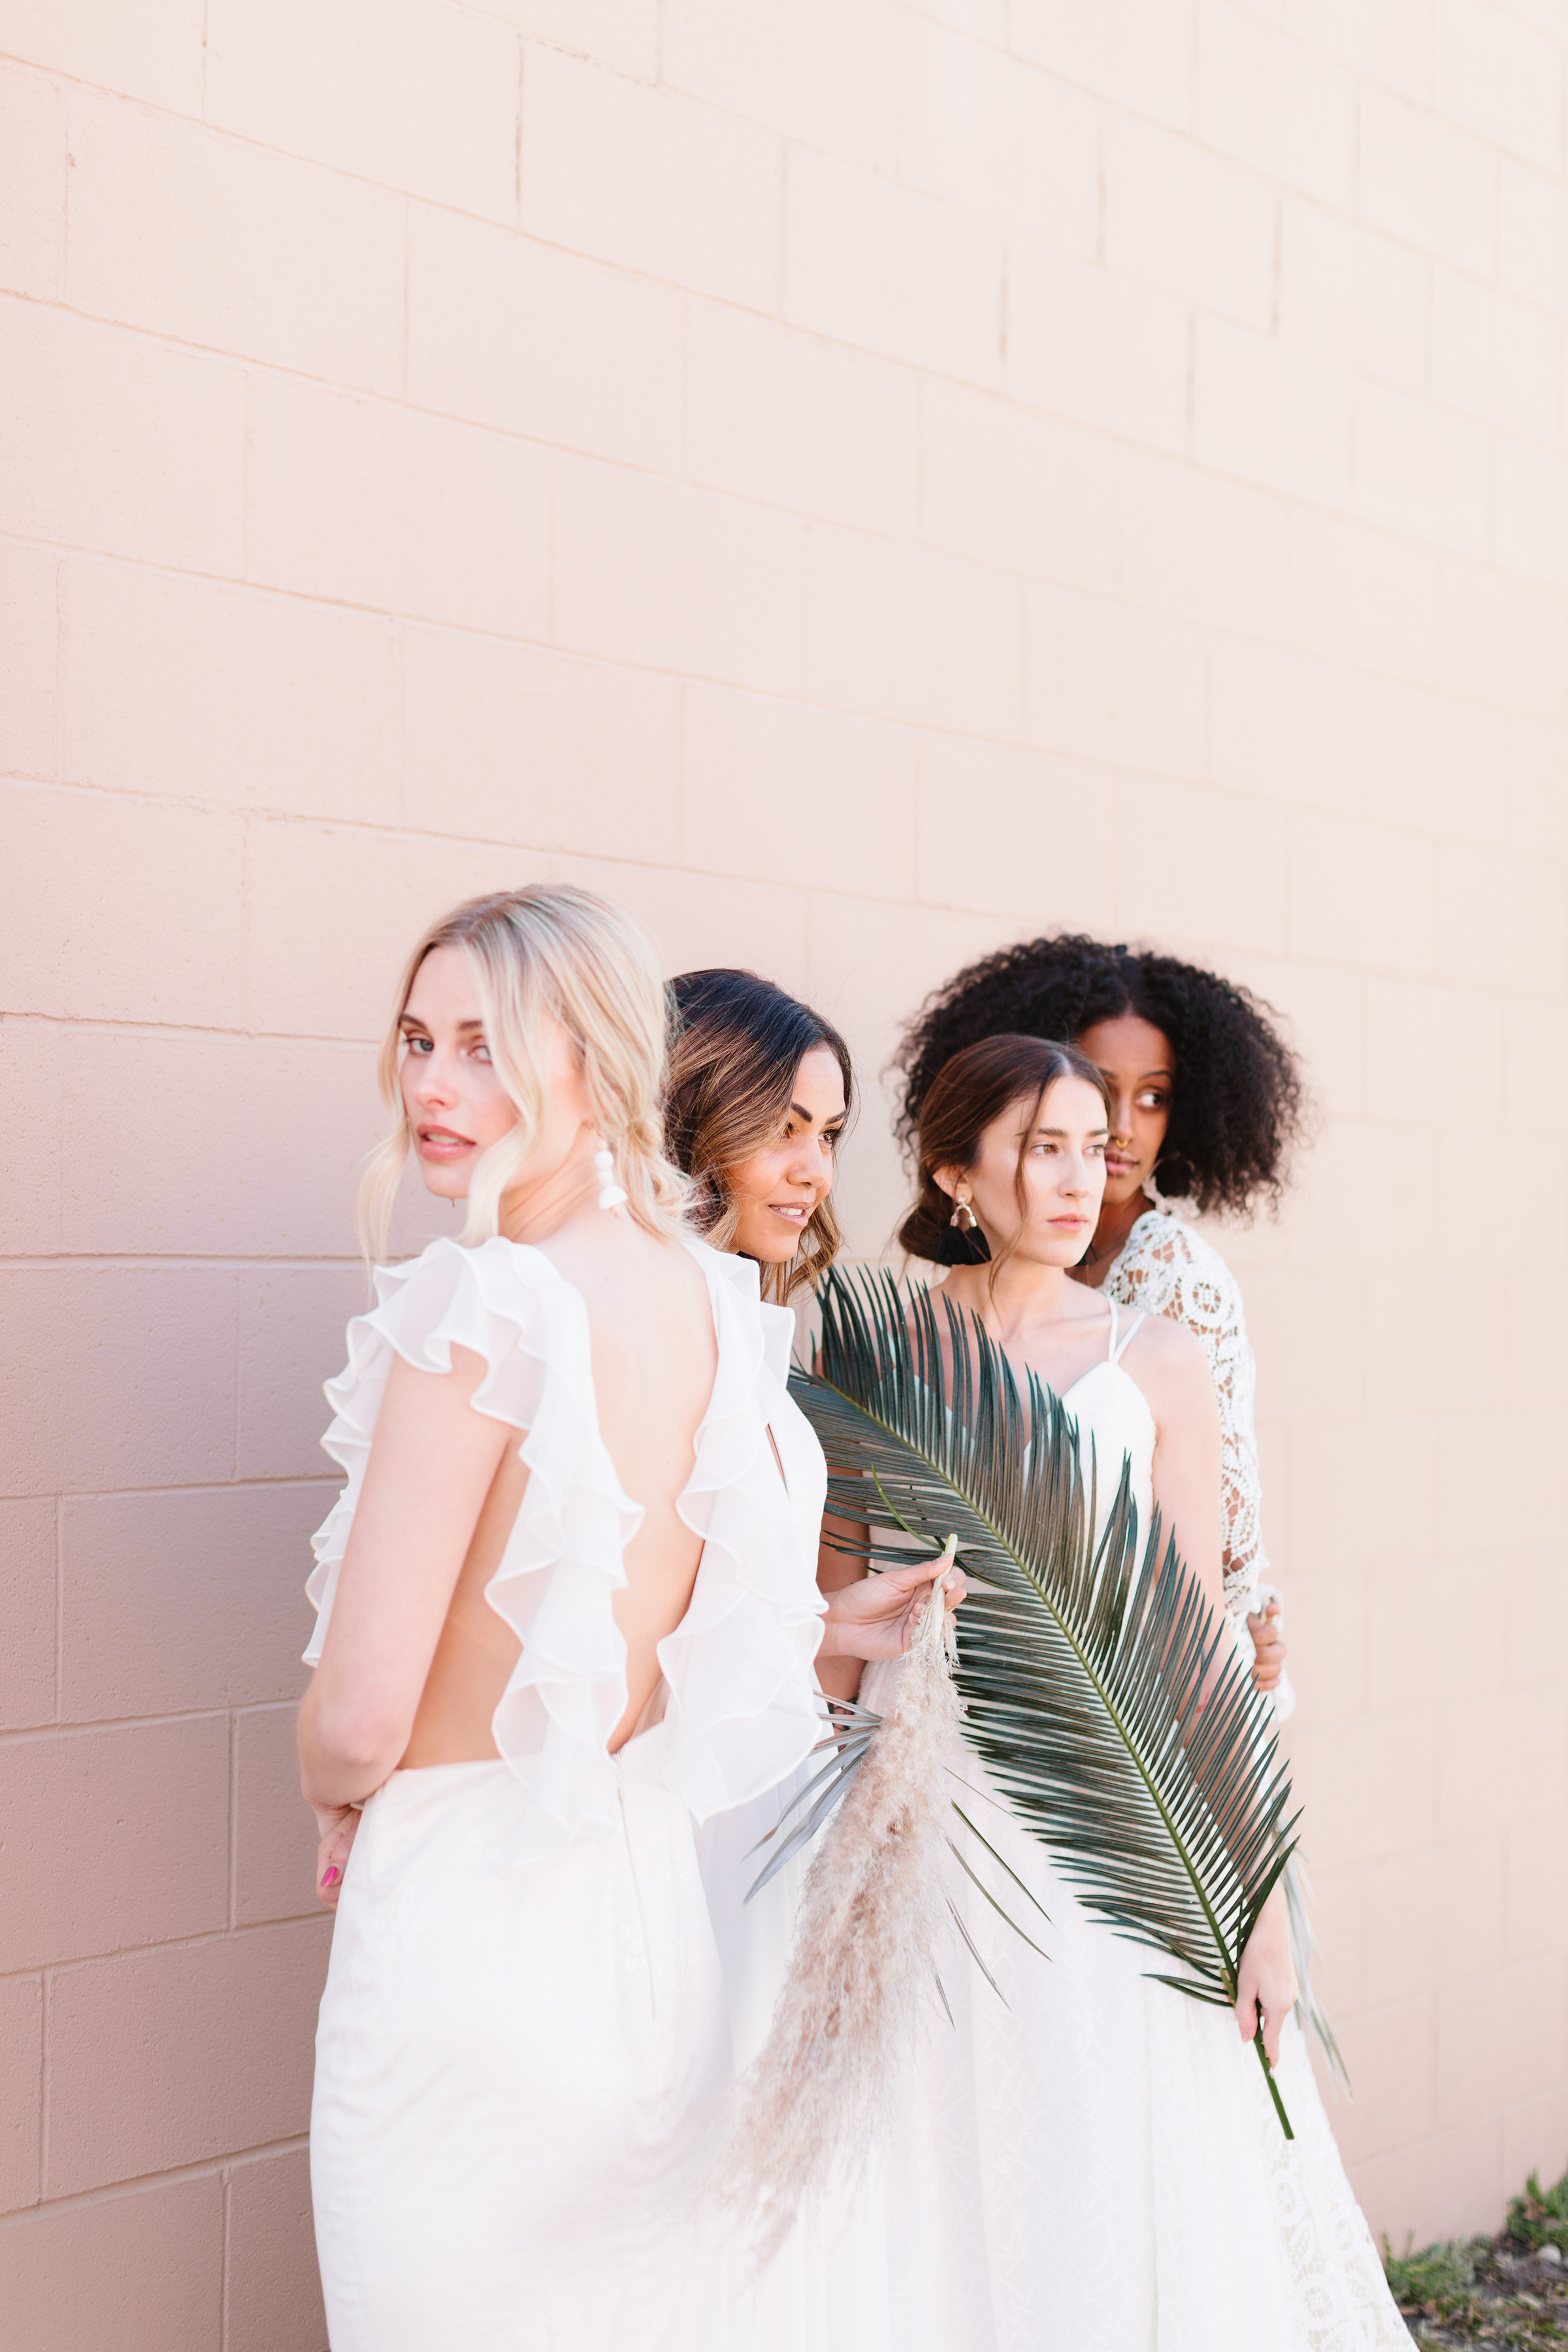 This All-Female Vendor Group Blew Us Away With Their Collaborative Vision // Inspiration at LoveNote Bride - on the Bronte Bride Blog